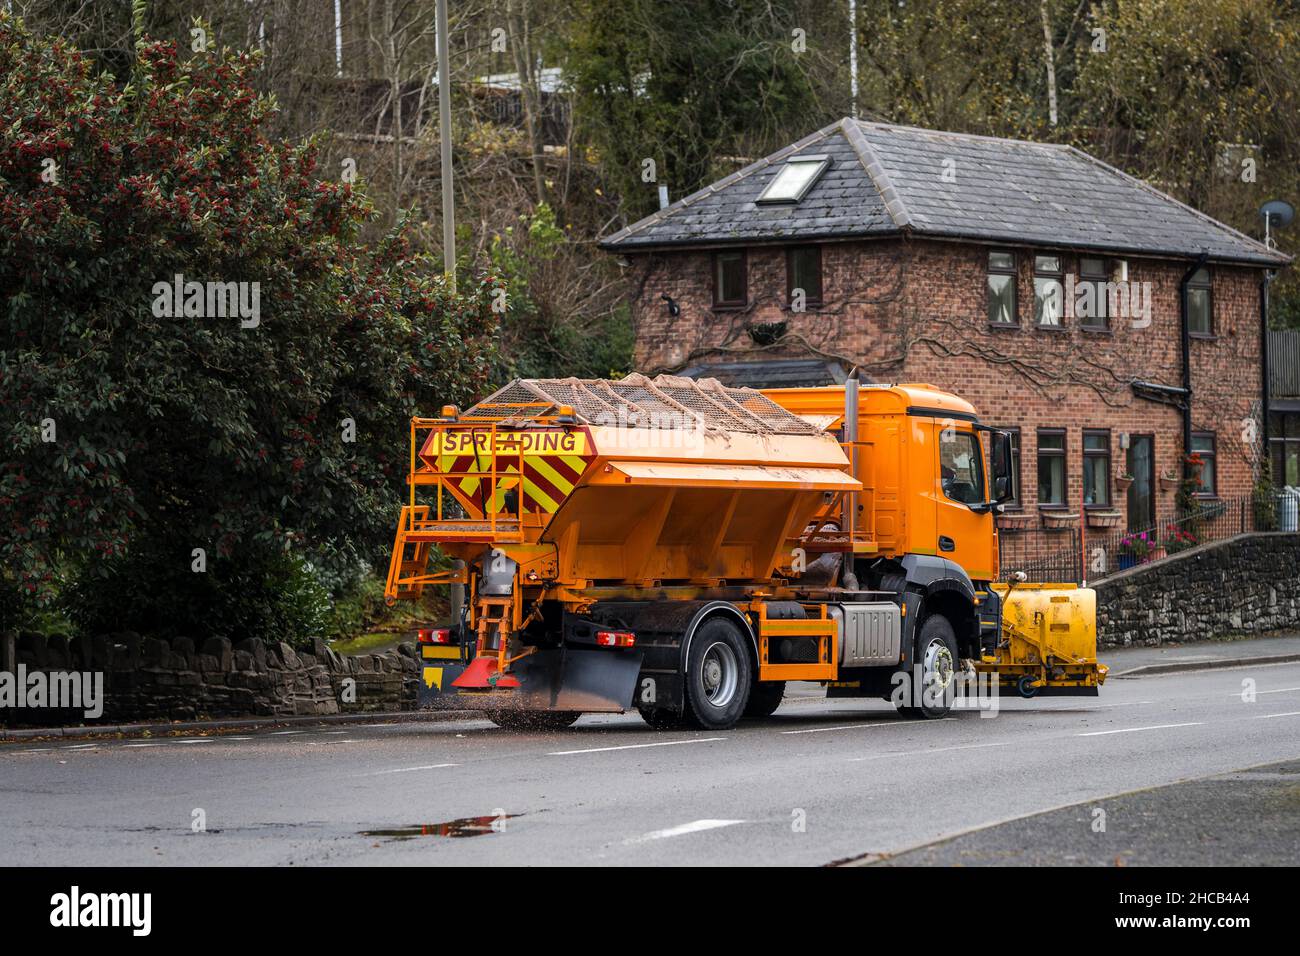 Orange winter maintenance gritter salt spreading lorry with snow plough fitted treating road surface before freezing temperatures to prevent ice form Stock Photo